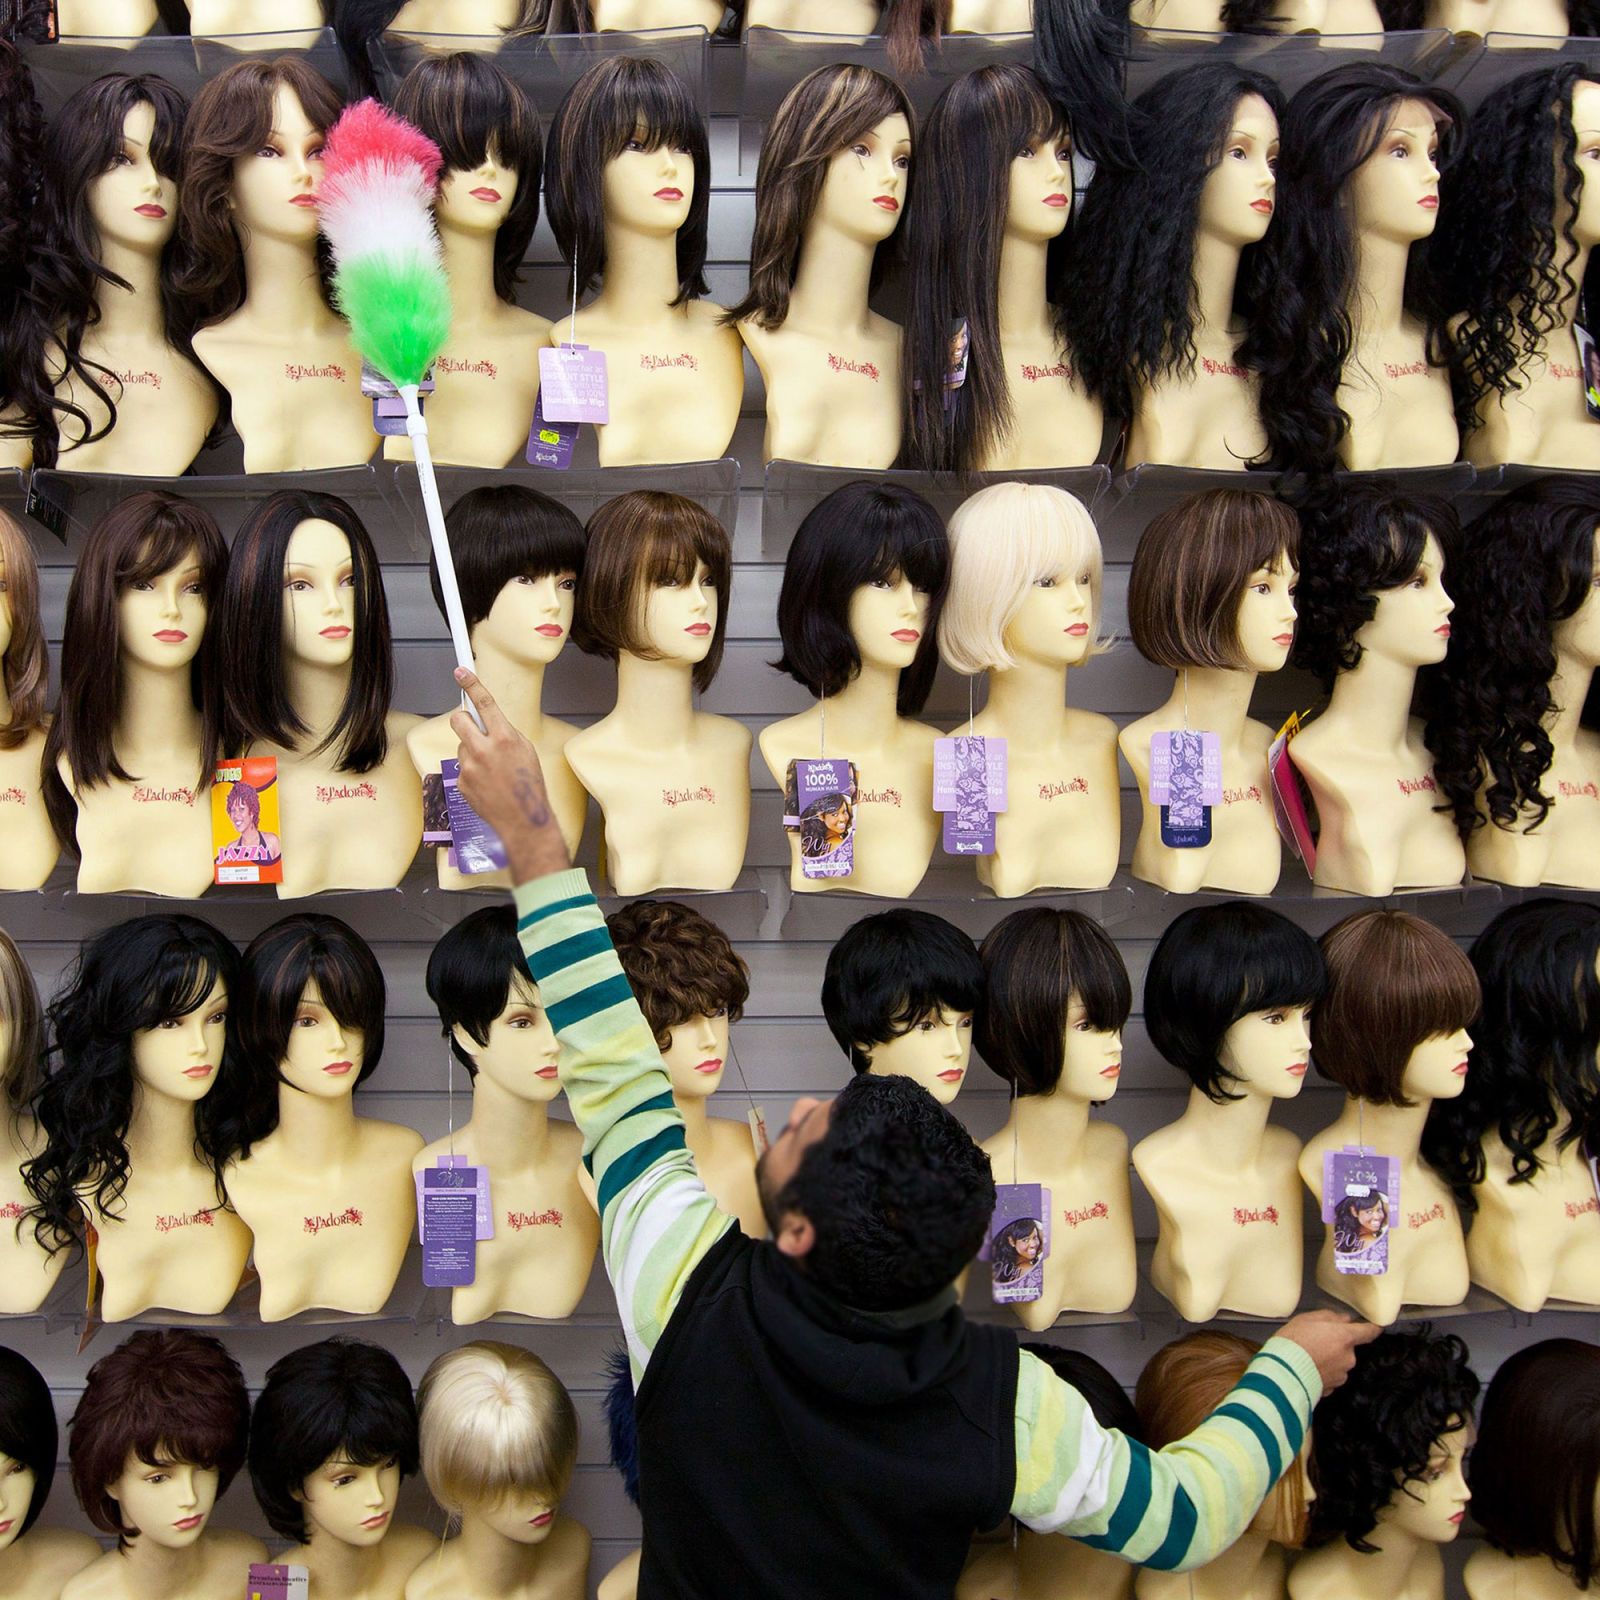 Jewish Orthodox Women and Wig Hair Industry Marie Claire